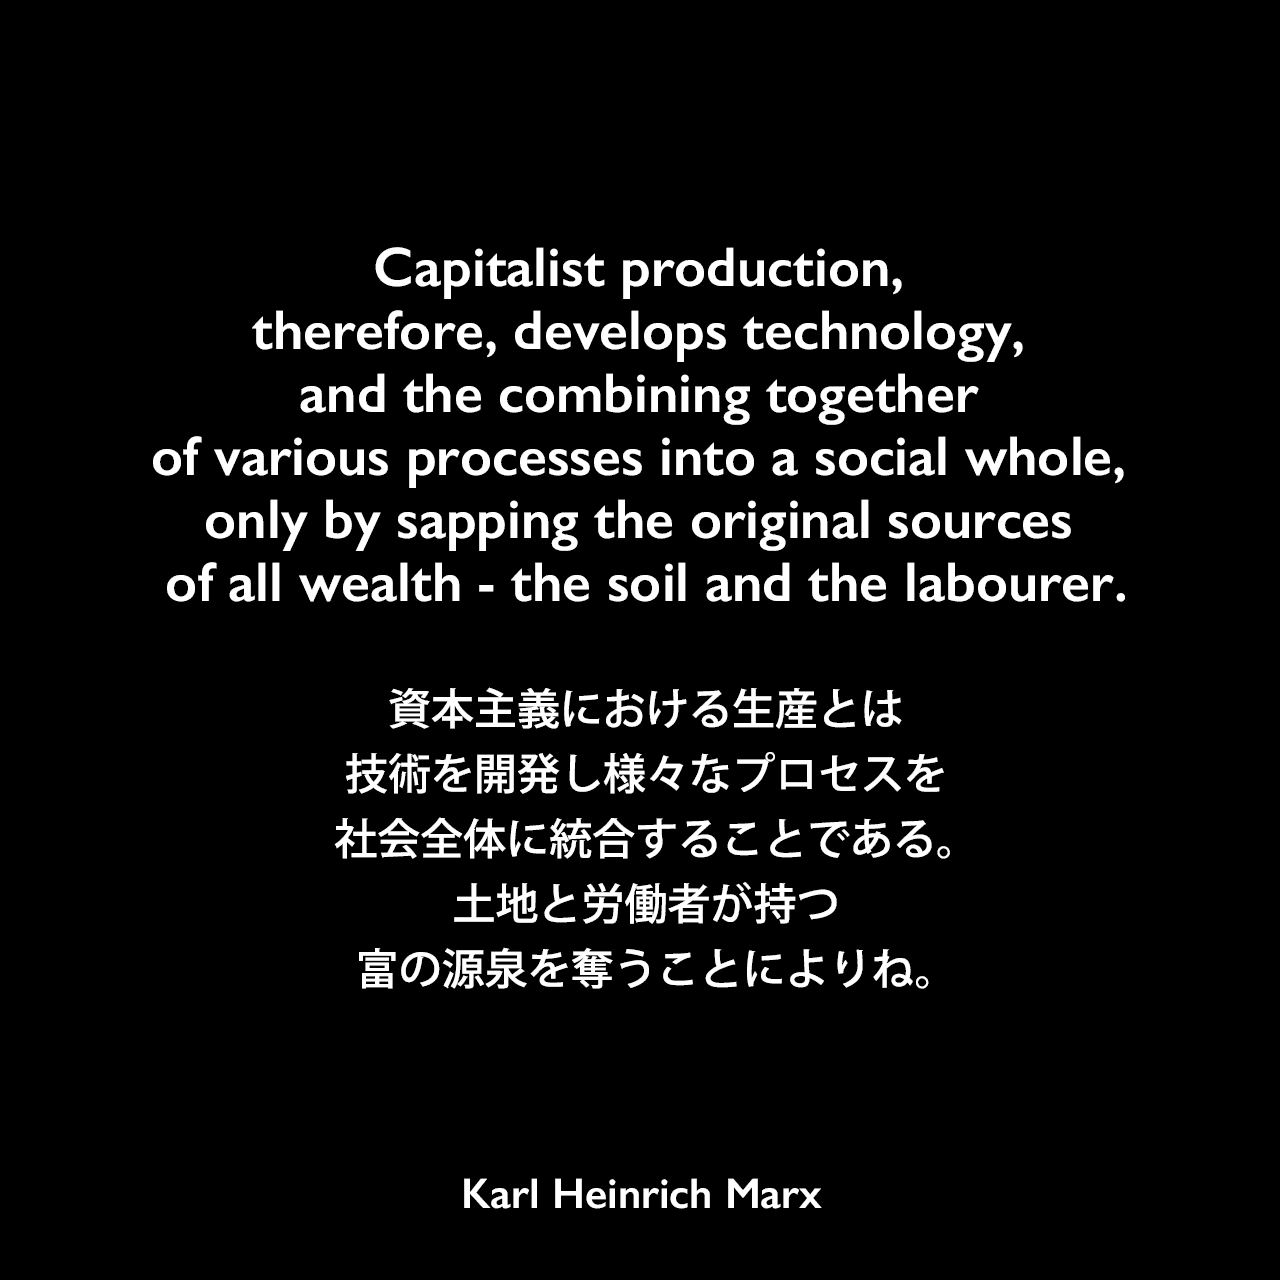 Capitalist production, therefore, develops technology, and the combining together of various processes into a social whole, only by sapping the original sources of all wealth - the soil and the labourer.資本主義における生産とは、技術を開発し、様々なプロセスを社会全体に統合することである。土地と労働者が持つ富の源泉を奪うことによりね。- カール・マルクス著「資本論」よりKarl Heinrich Marx